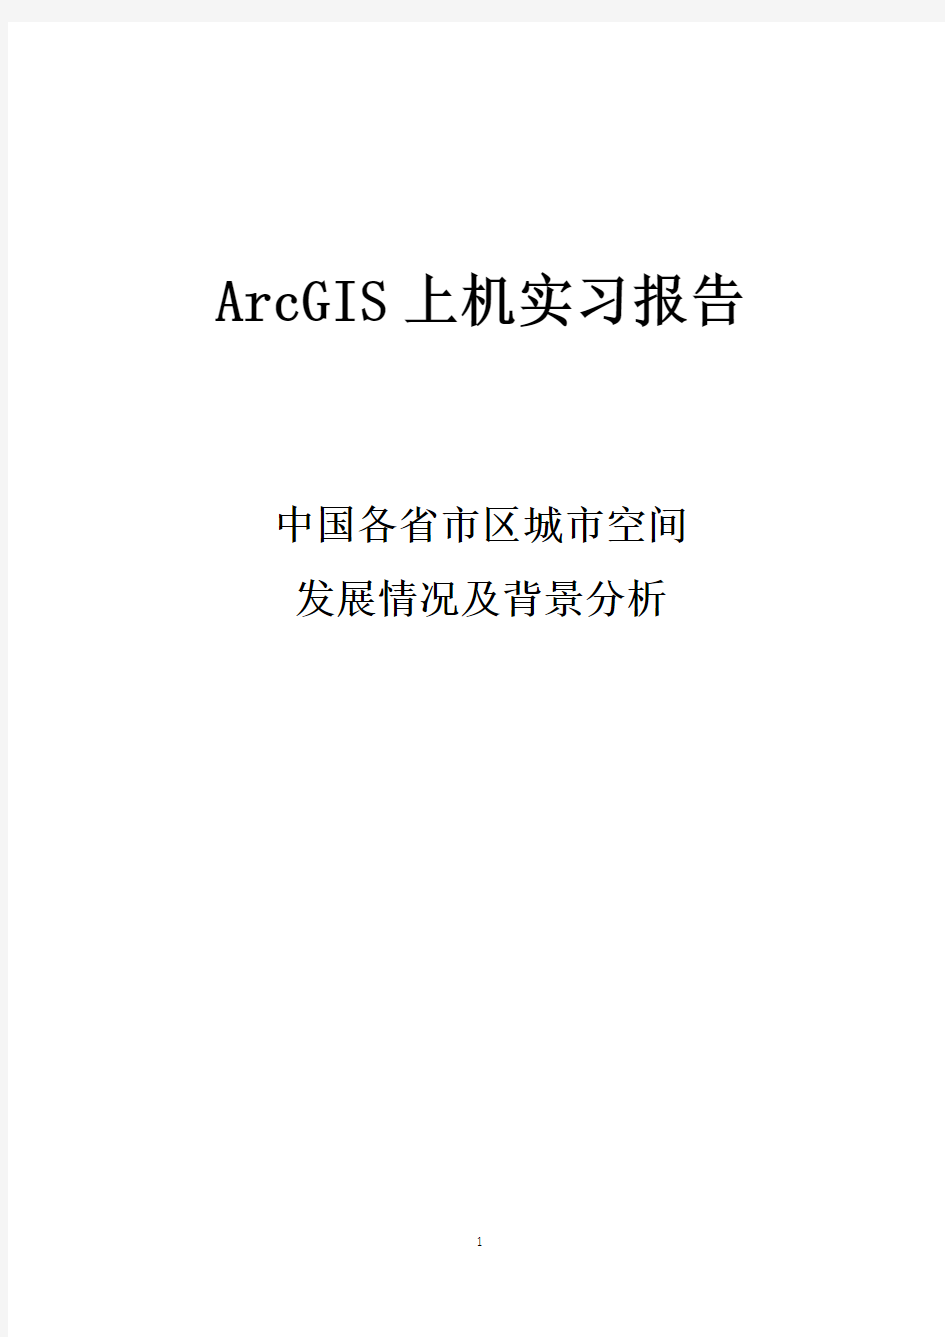 ArcGIS上机实习报告